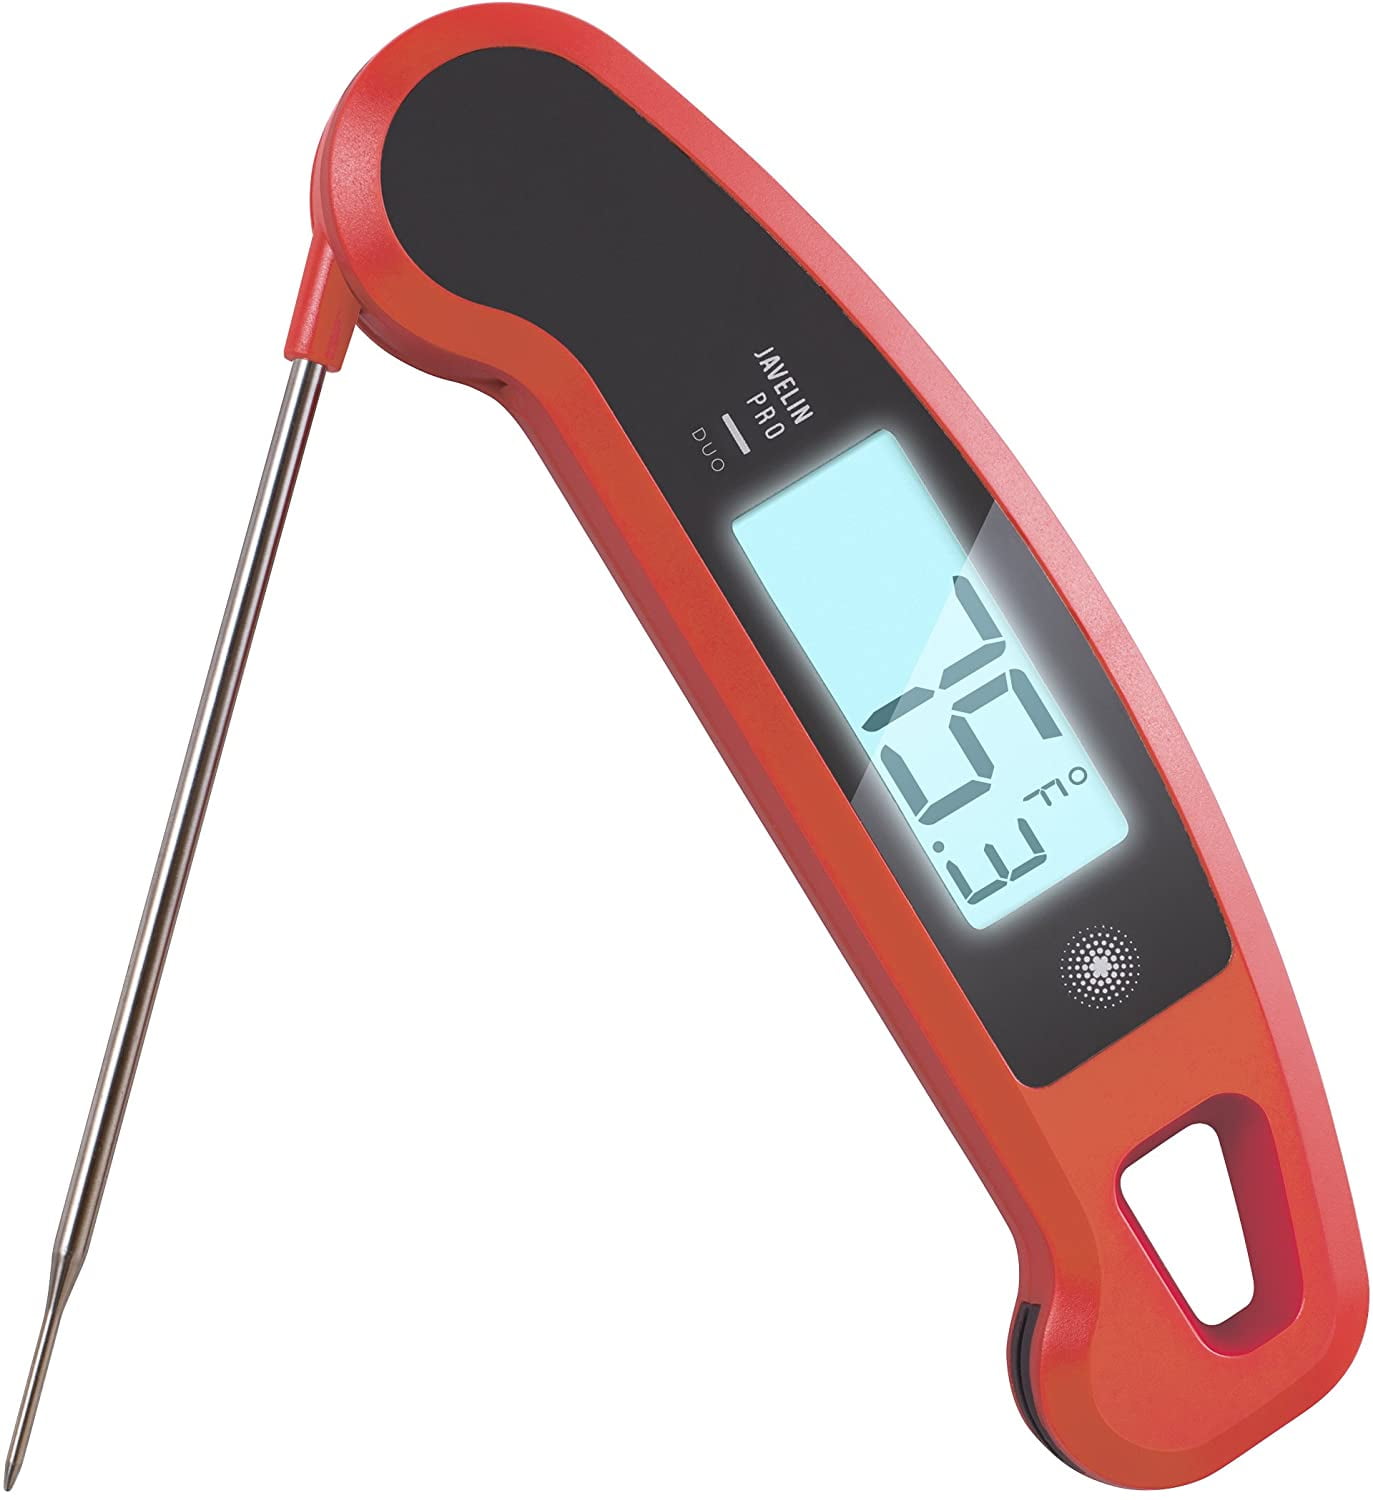 DYNT-02 DYNAMO TEMP Professional THERMOCOUPLE FOOD THERMOMETER